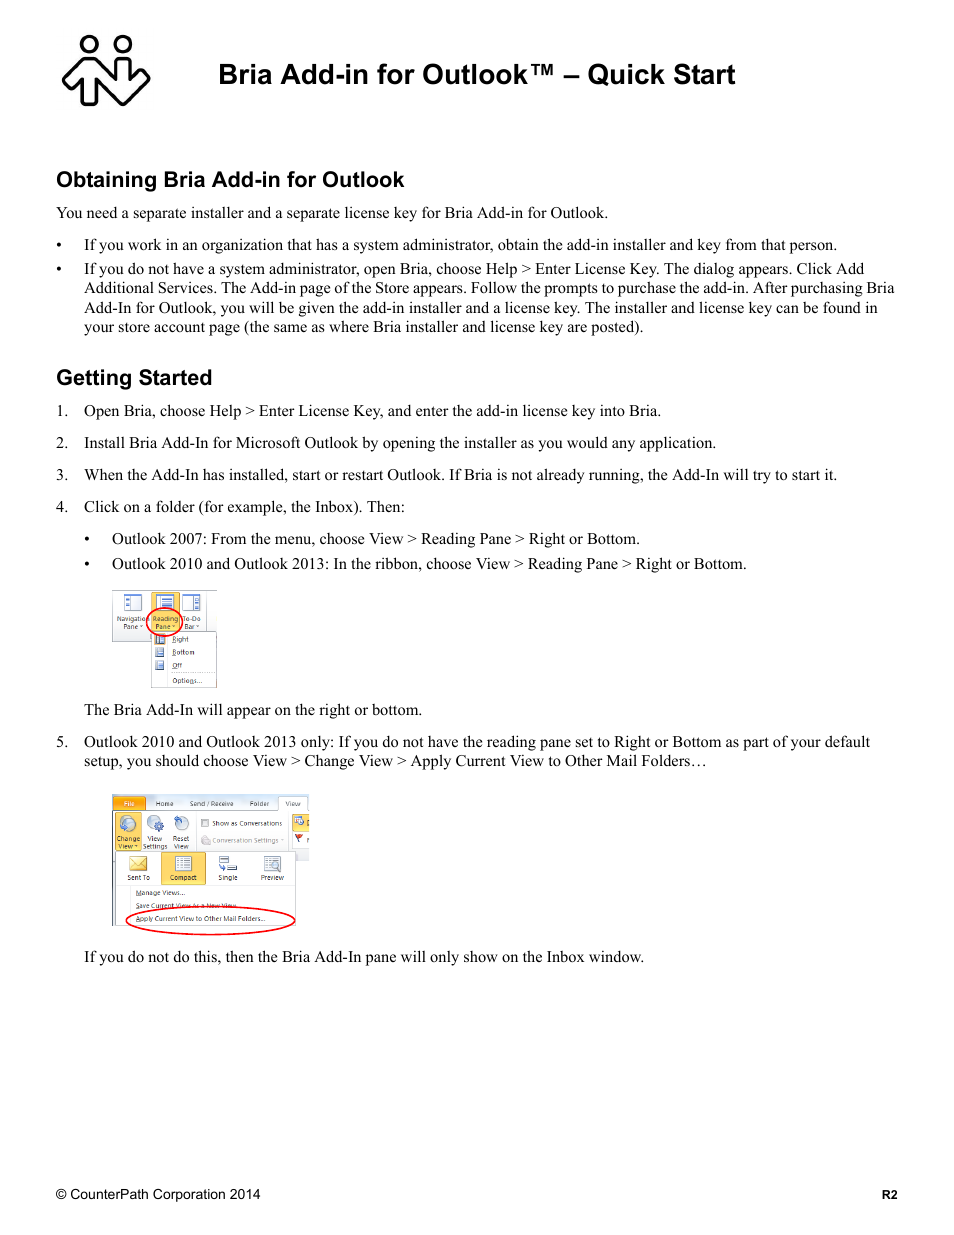 Bria for Outlook Quick Start Guide